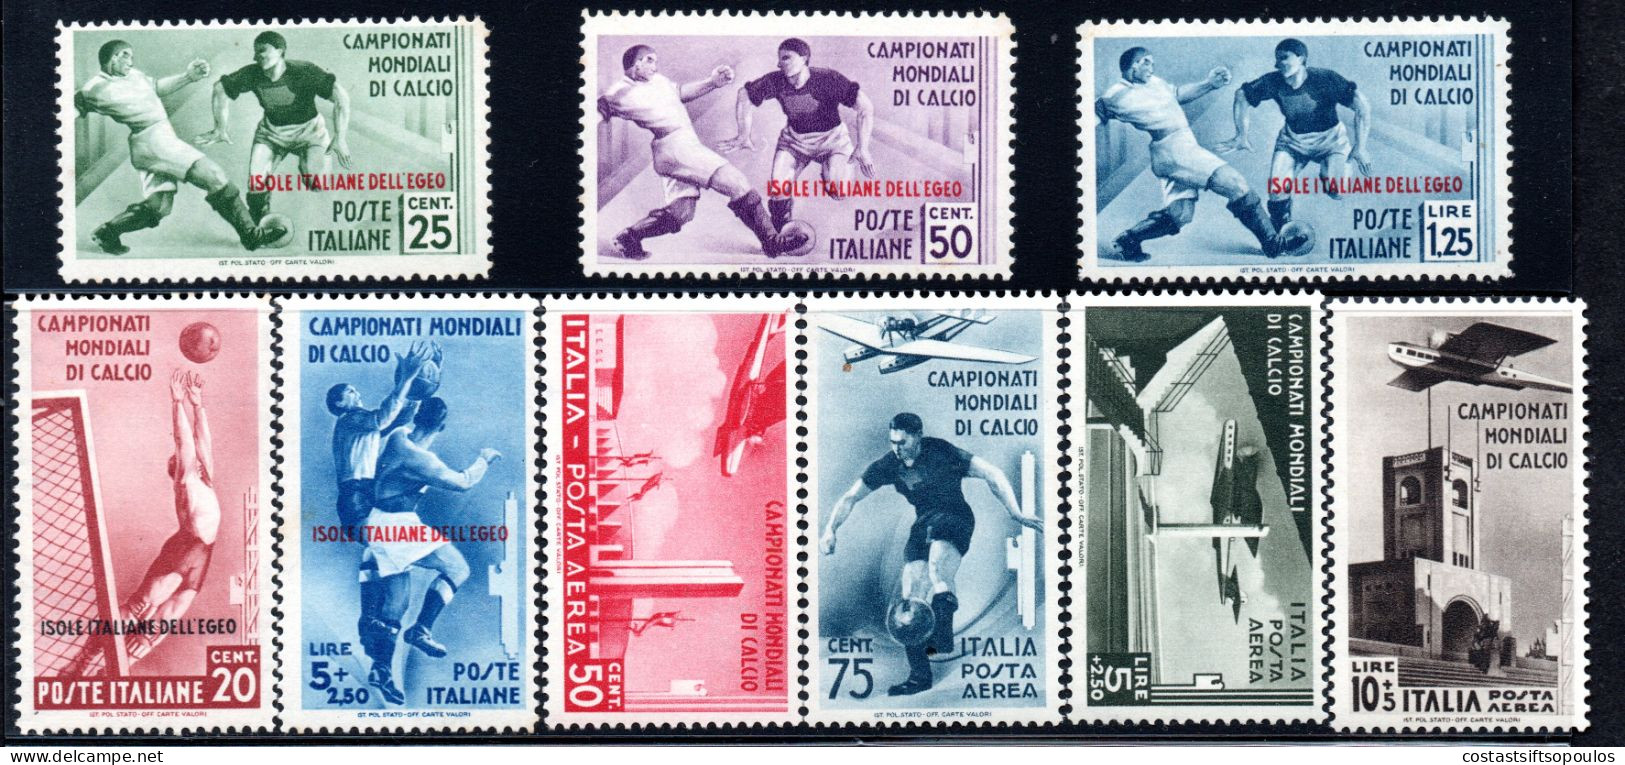 2786. -5.GREECE,ITALY,DODECANESE,1934 SOCCER,FOOTBALL,SC.31-35, C28-C31MNH.LIGHT GUM BLEMISHES, SEE SCAN. - Dodecaneso